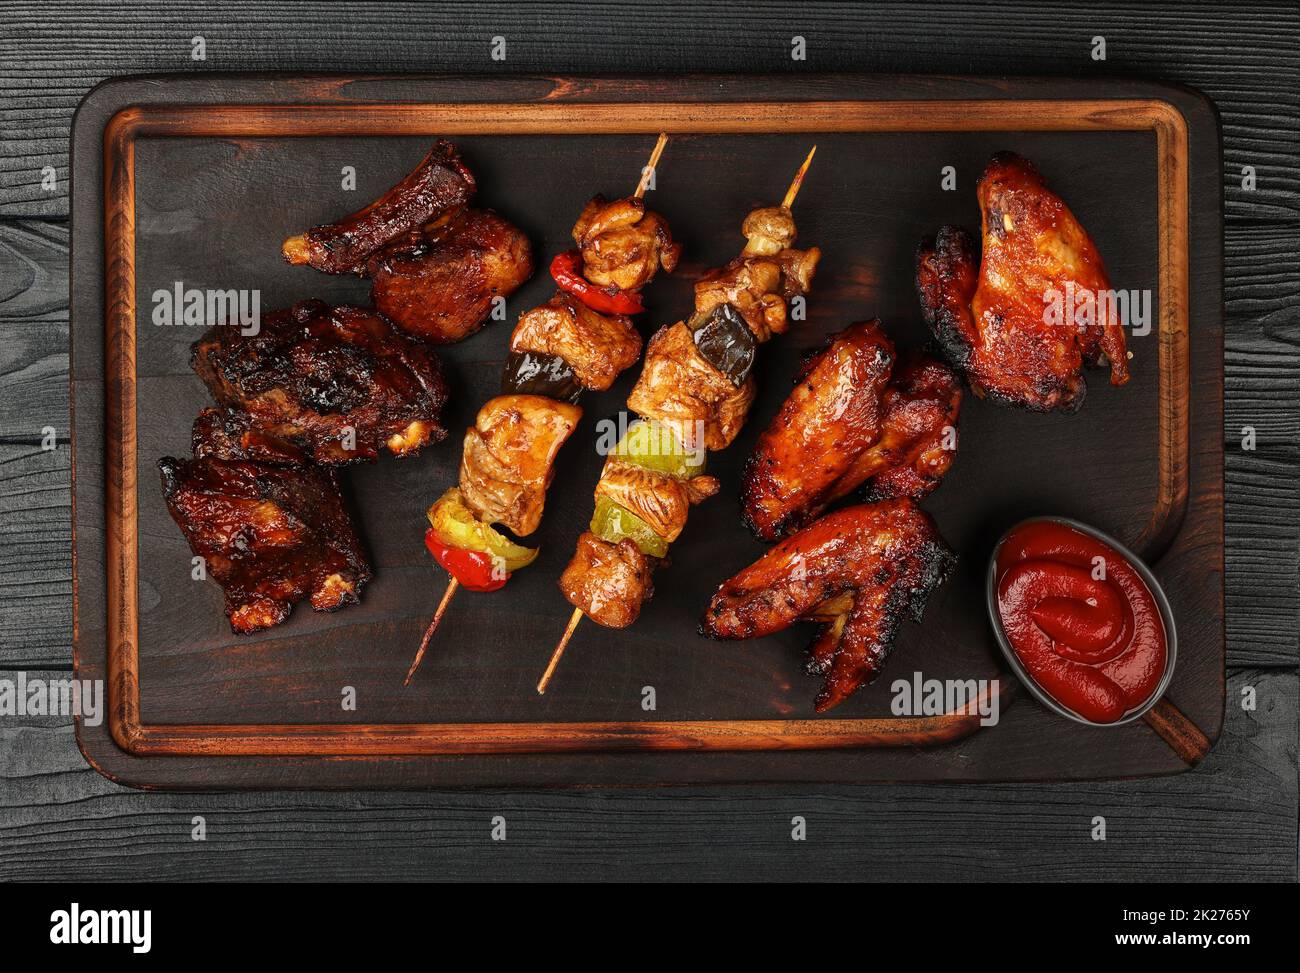 Mixed barbecue of chicken wings and beef ribs Stock Photo